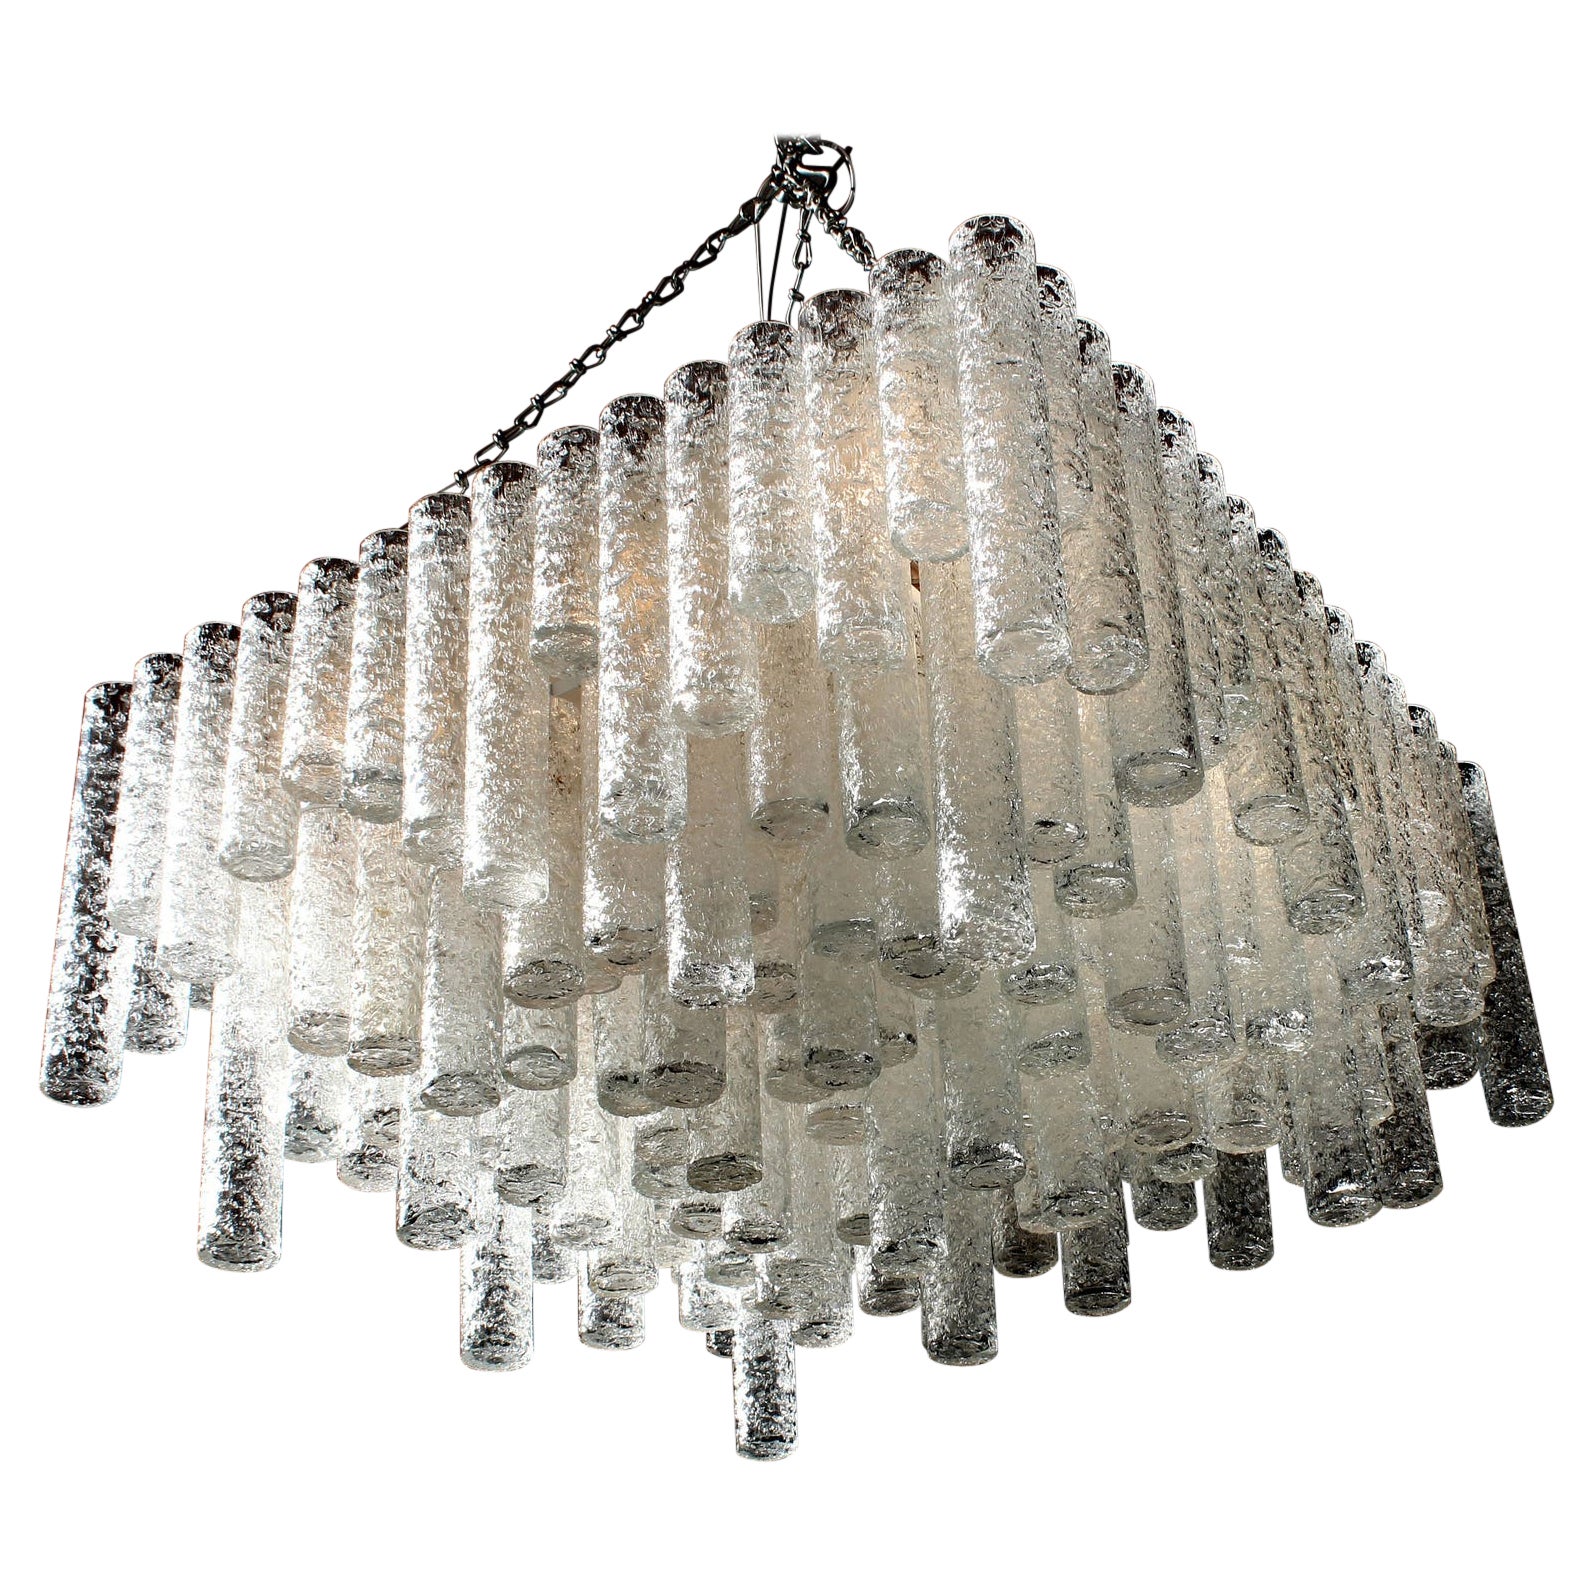 Extremely Rare Doria Ballroom Plafoniere or Chandelier, Germany 1970s For Sale